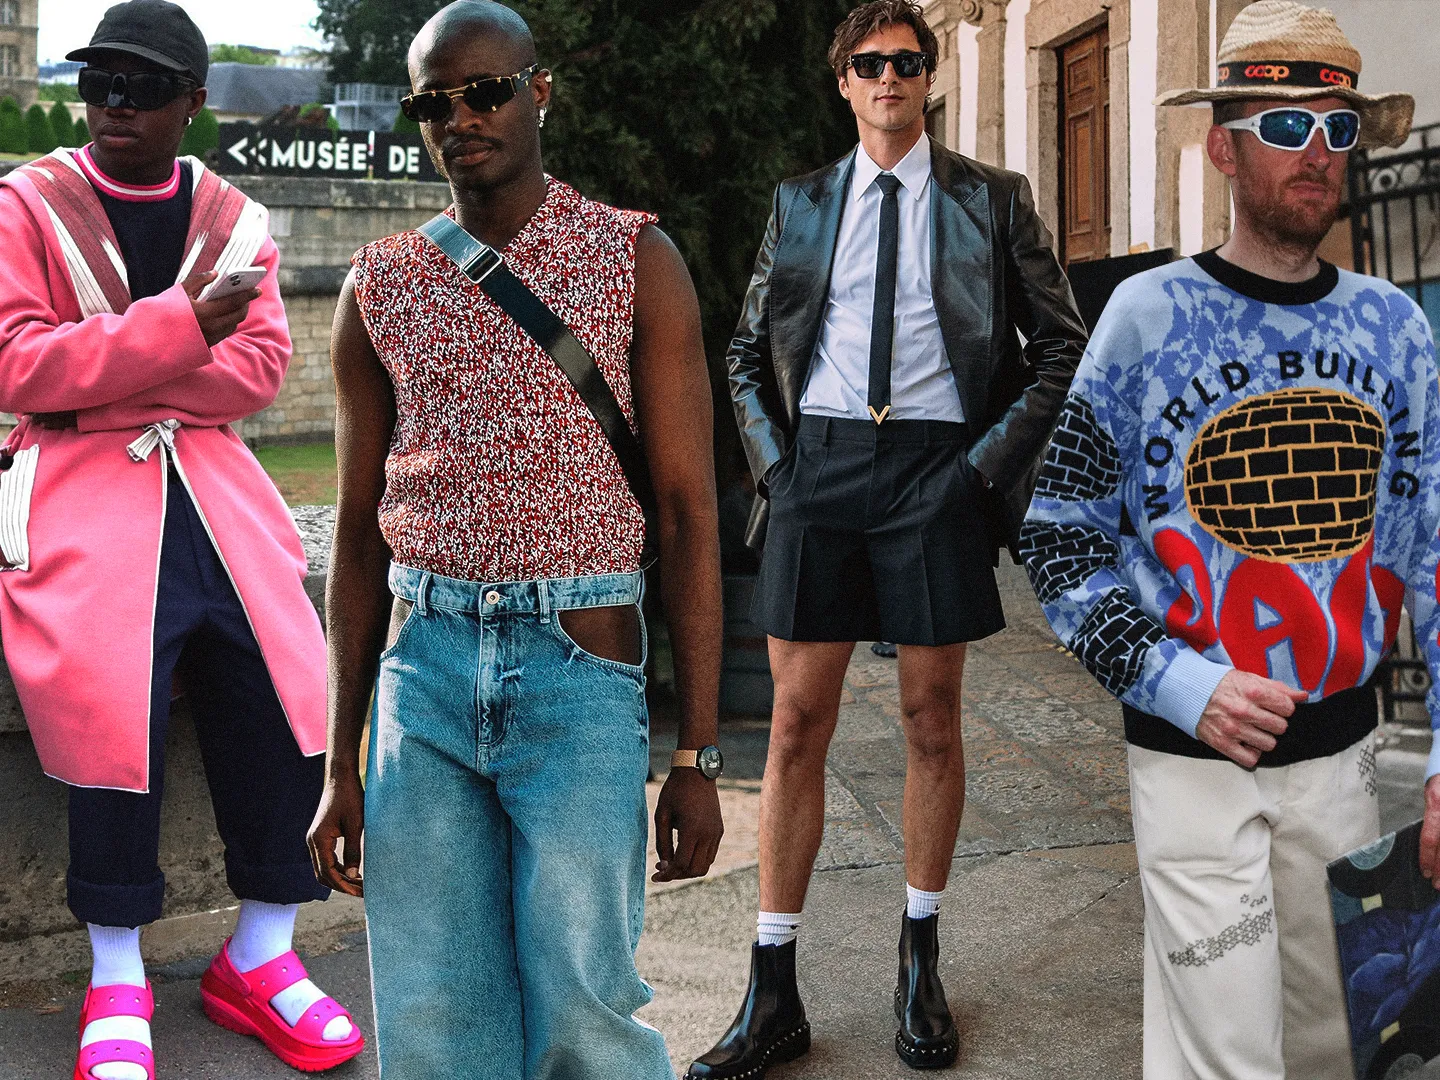 “Street Smart Style: The Intersection of Comfort, Culture, and Couture in Fashion”